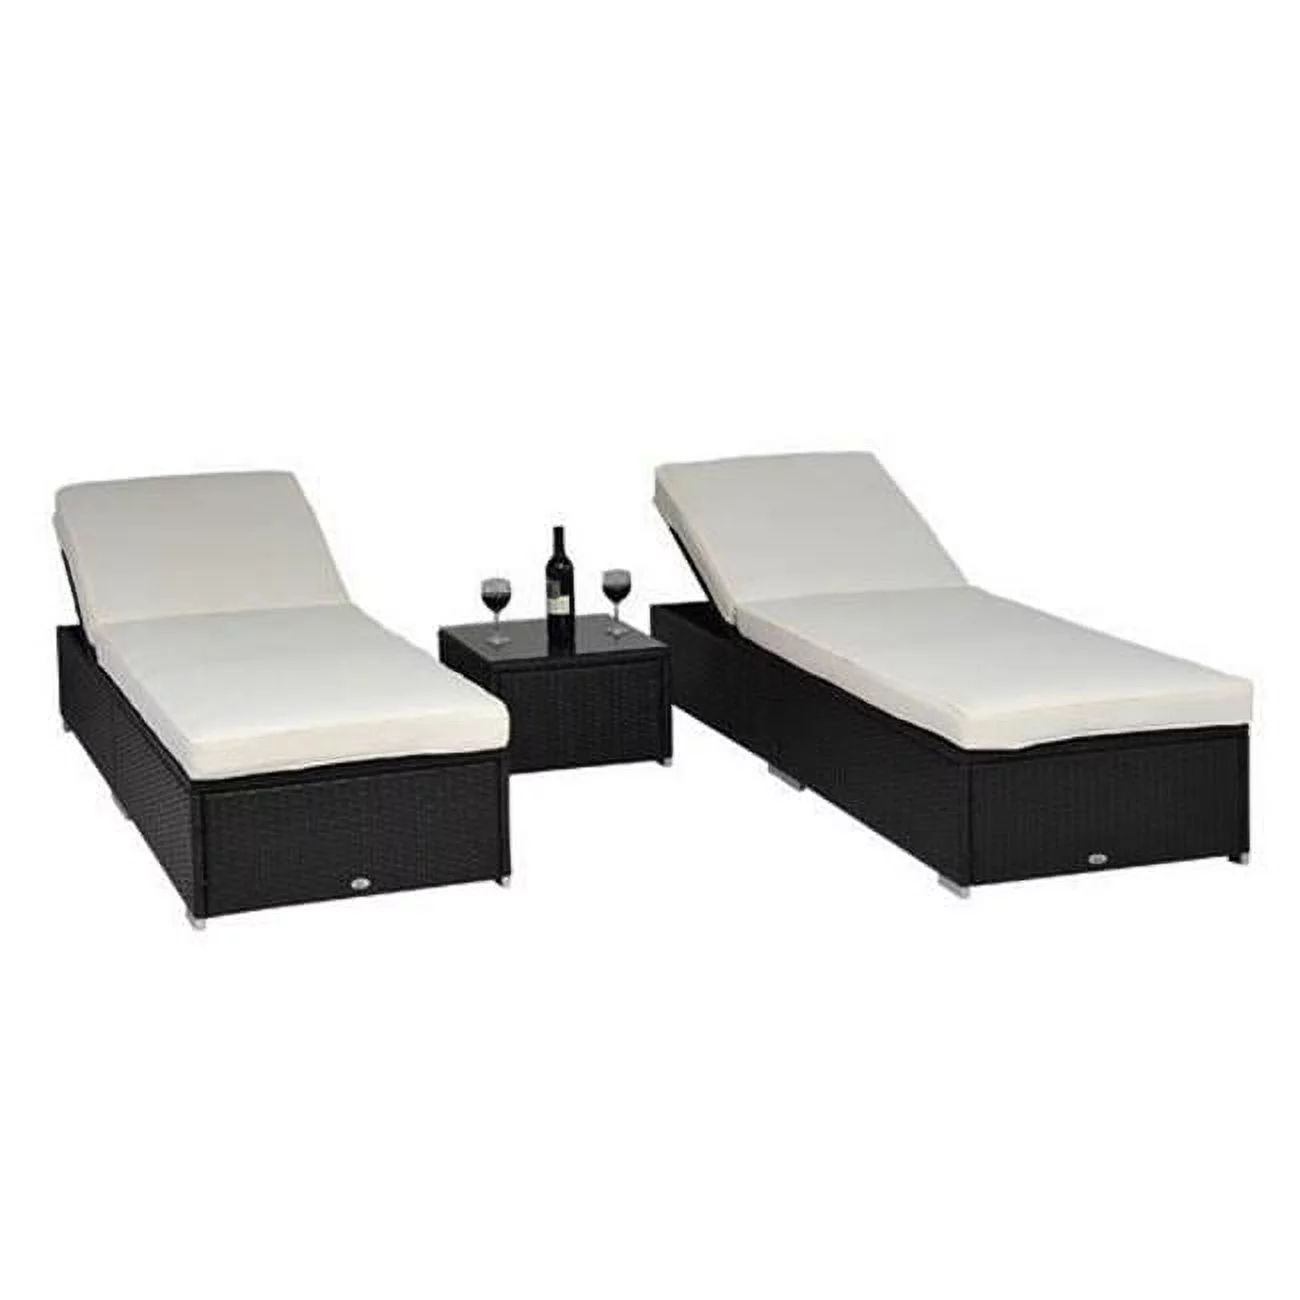 Outsunny with Cushion Wicker Outdoor Chaise Lounge, White | Walmart (US)